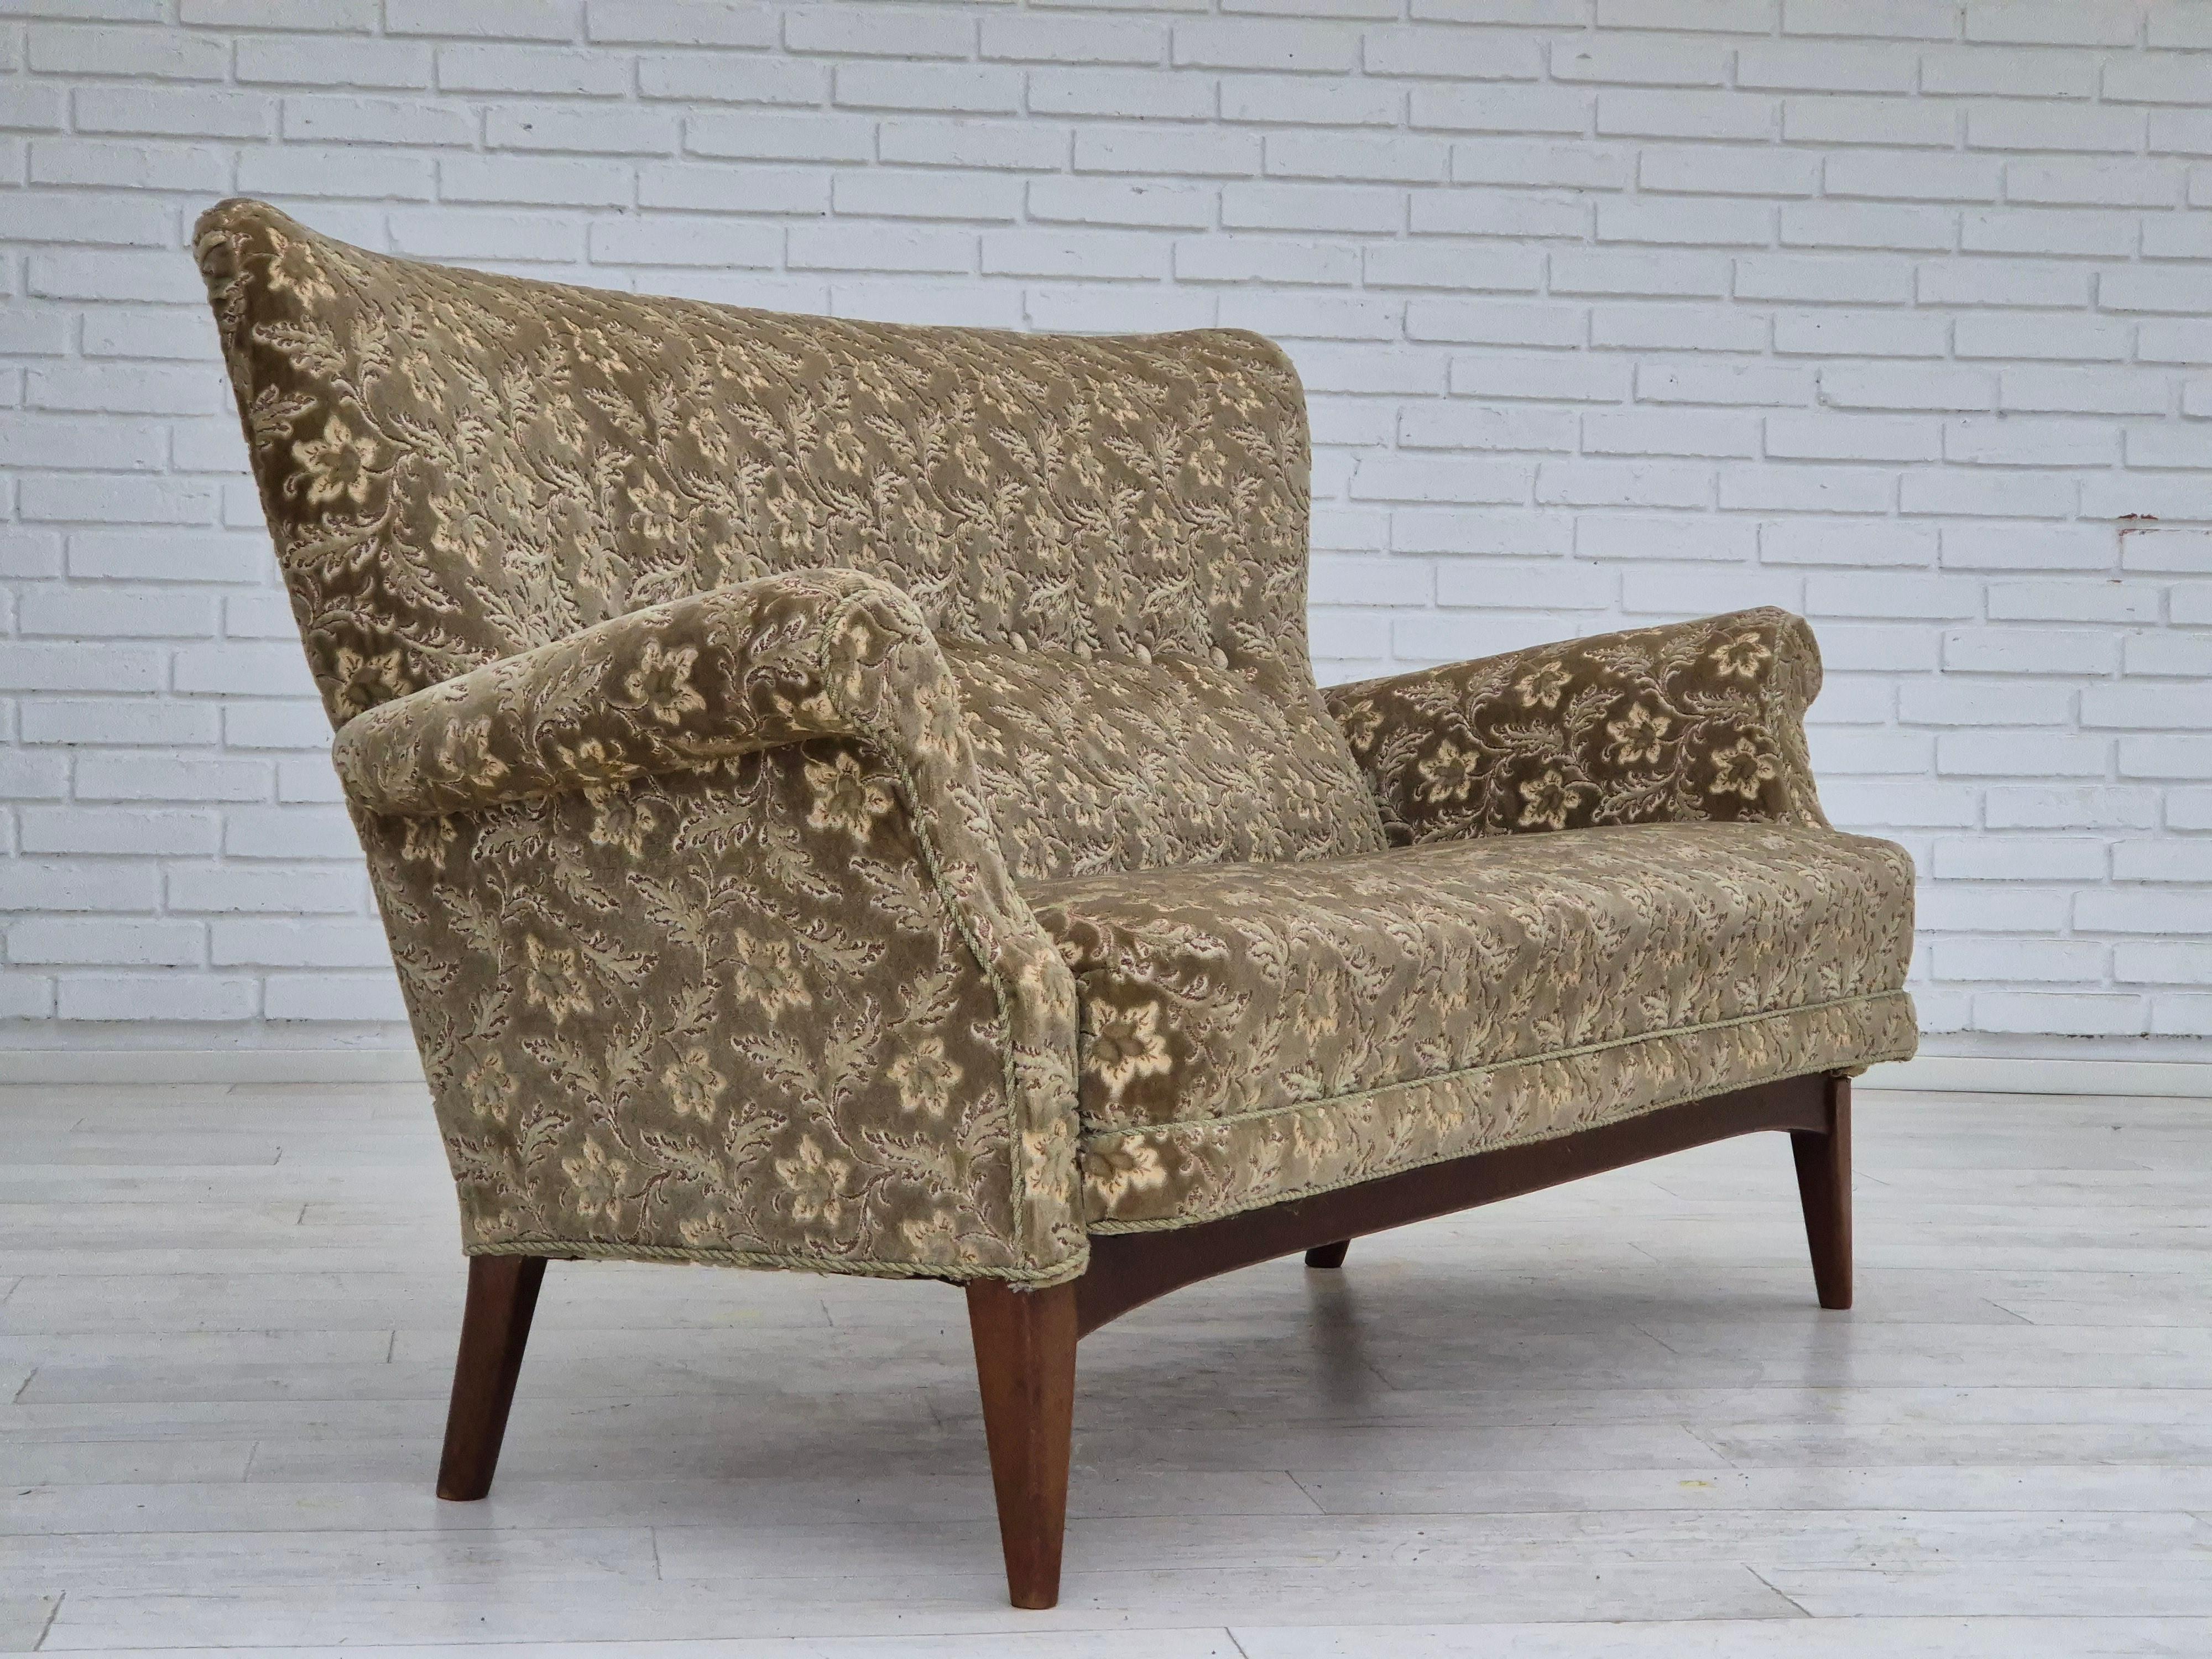 1960s, Danish 2 seater sofa by Fritz Hansen. Very good condition: no smells and no stains. Sofa was reupholstered about 20 years ago by craftsman. Green furniture velour. Renewed beech wood legs. Springs in the seat. Manufactured by Danish furniture